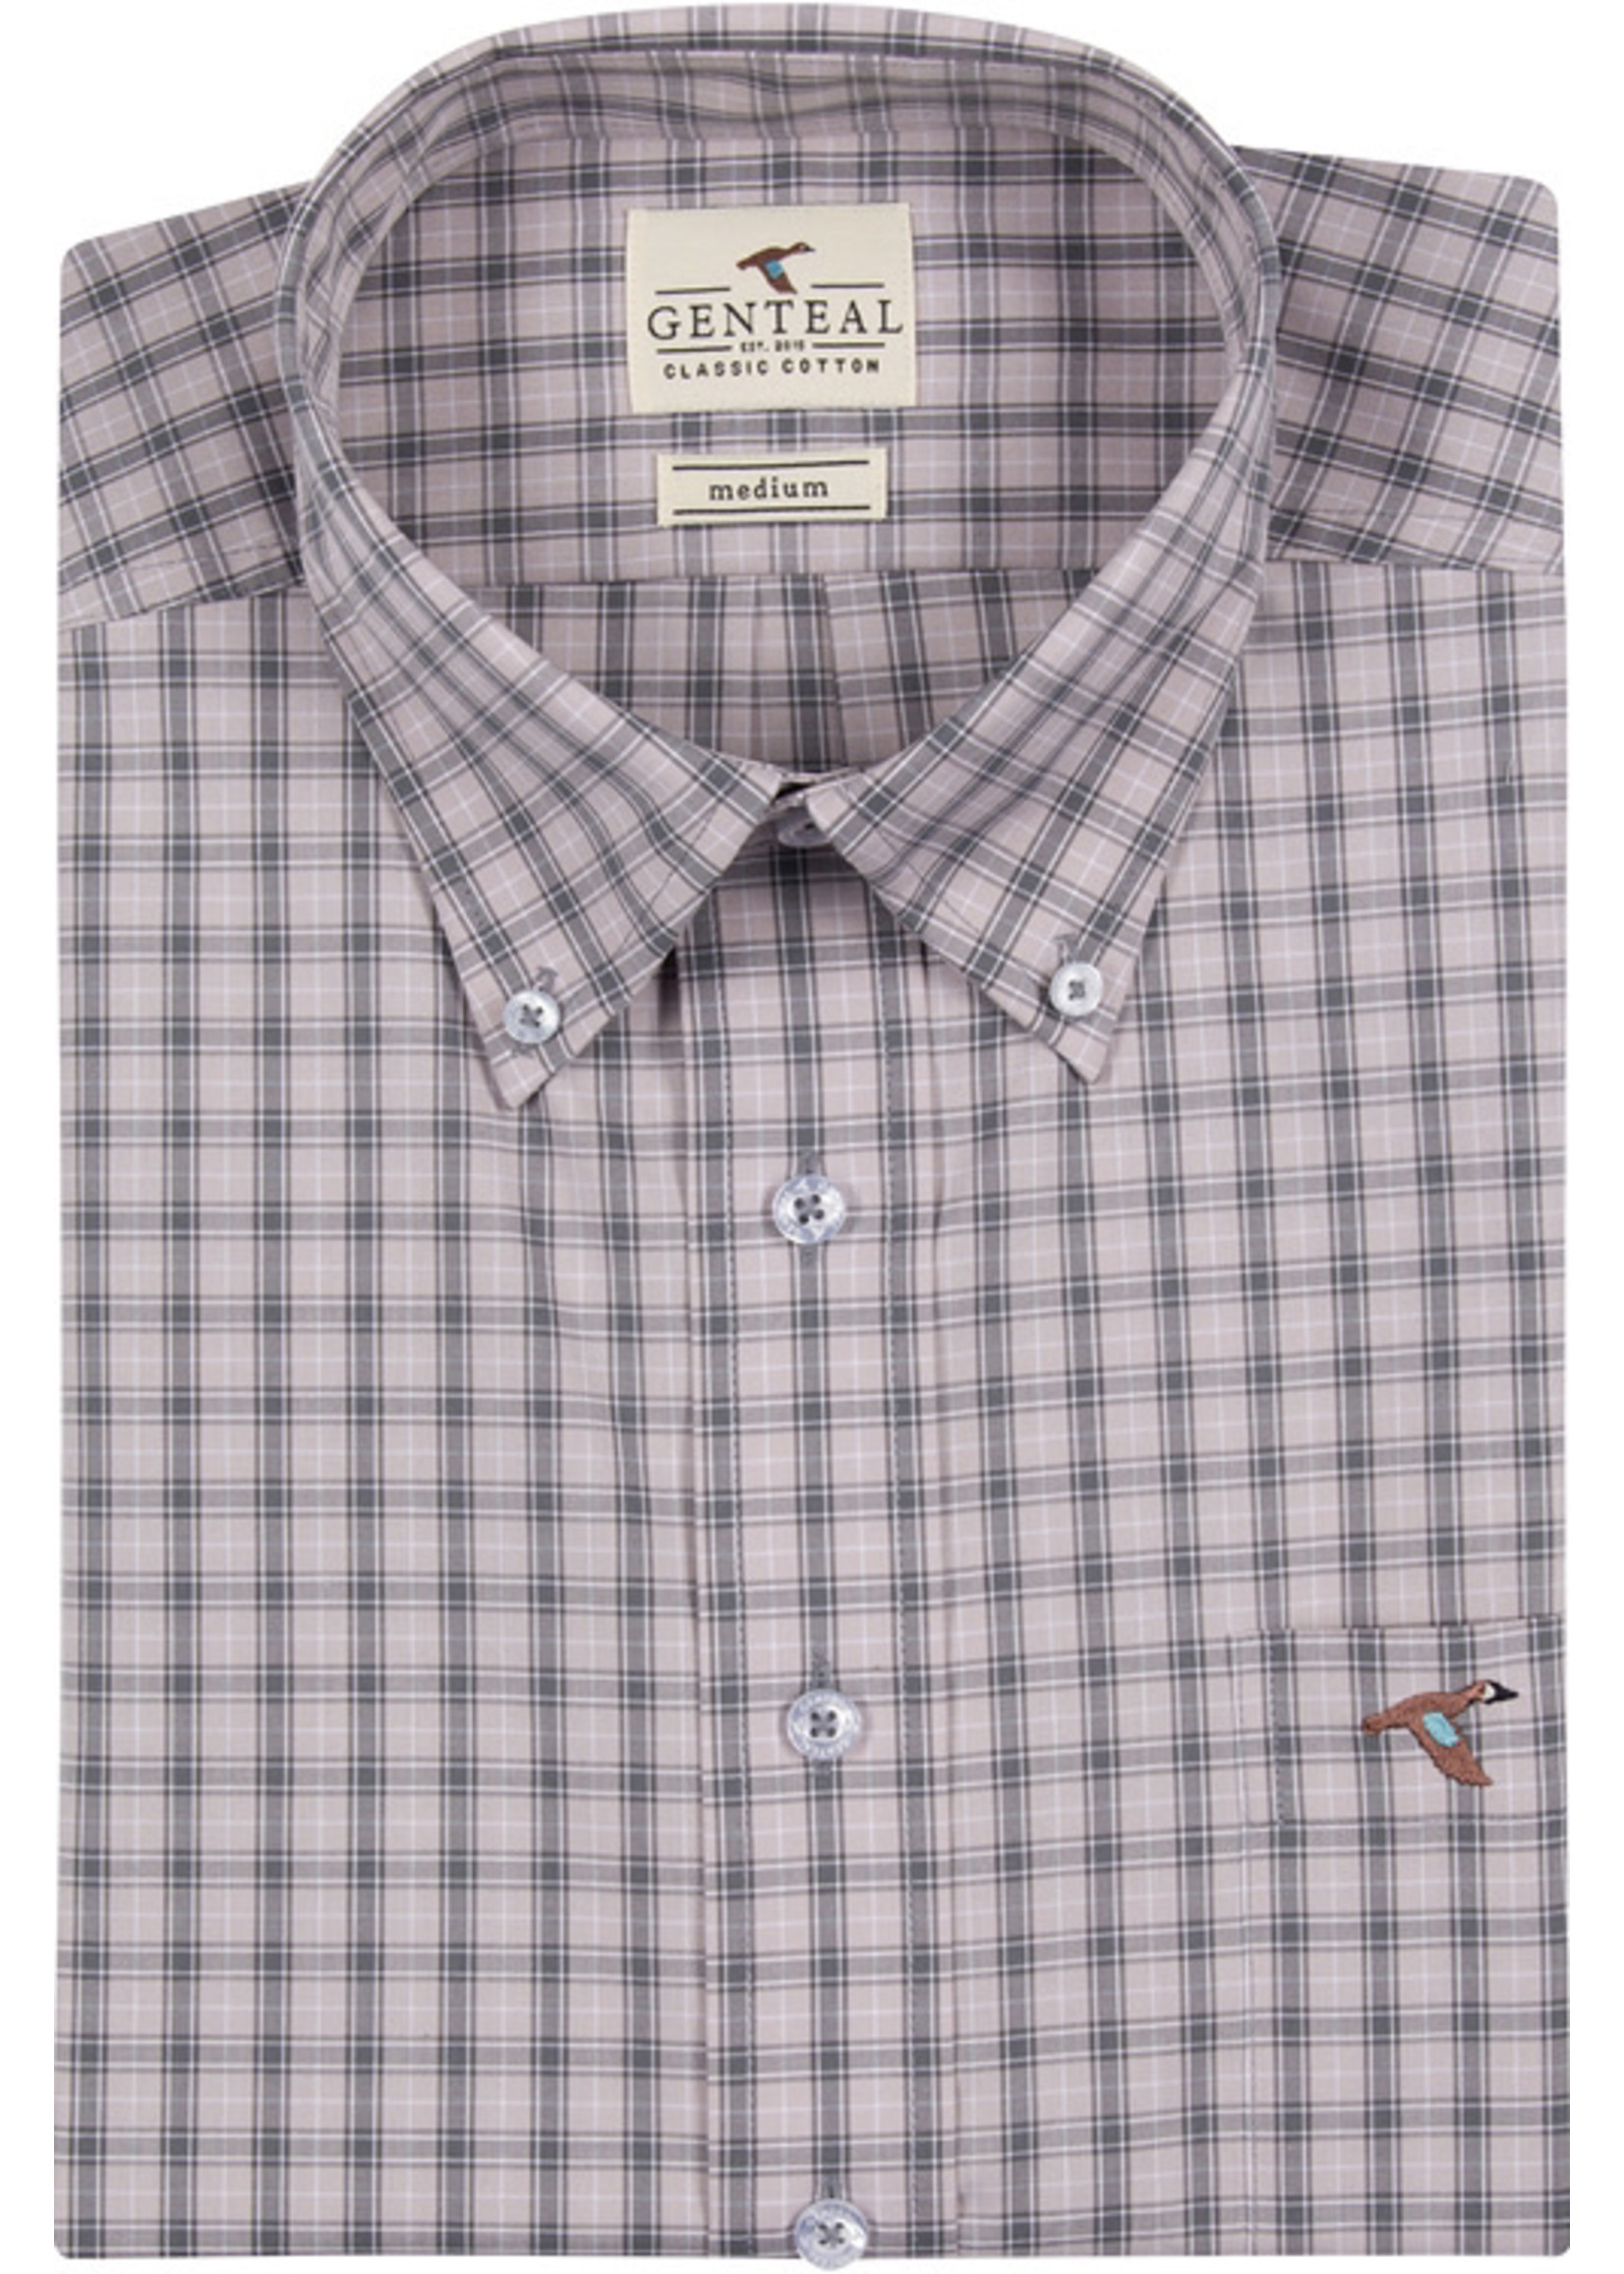 Genteal Stowe Plaid Cotton Woven